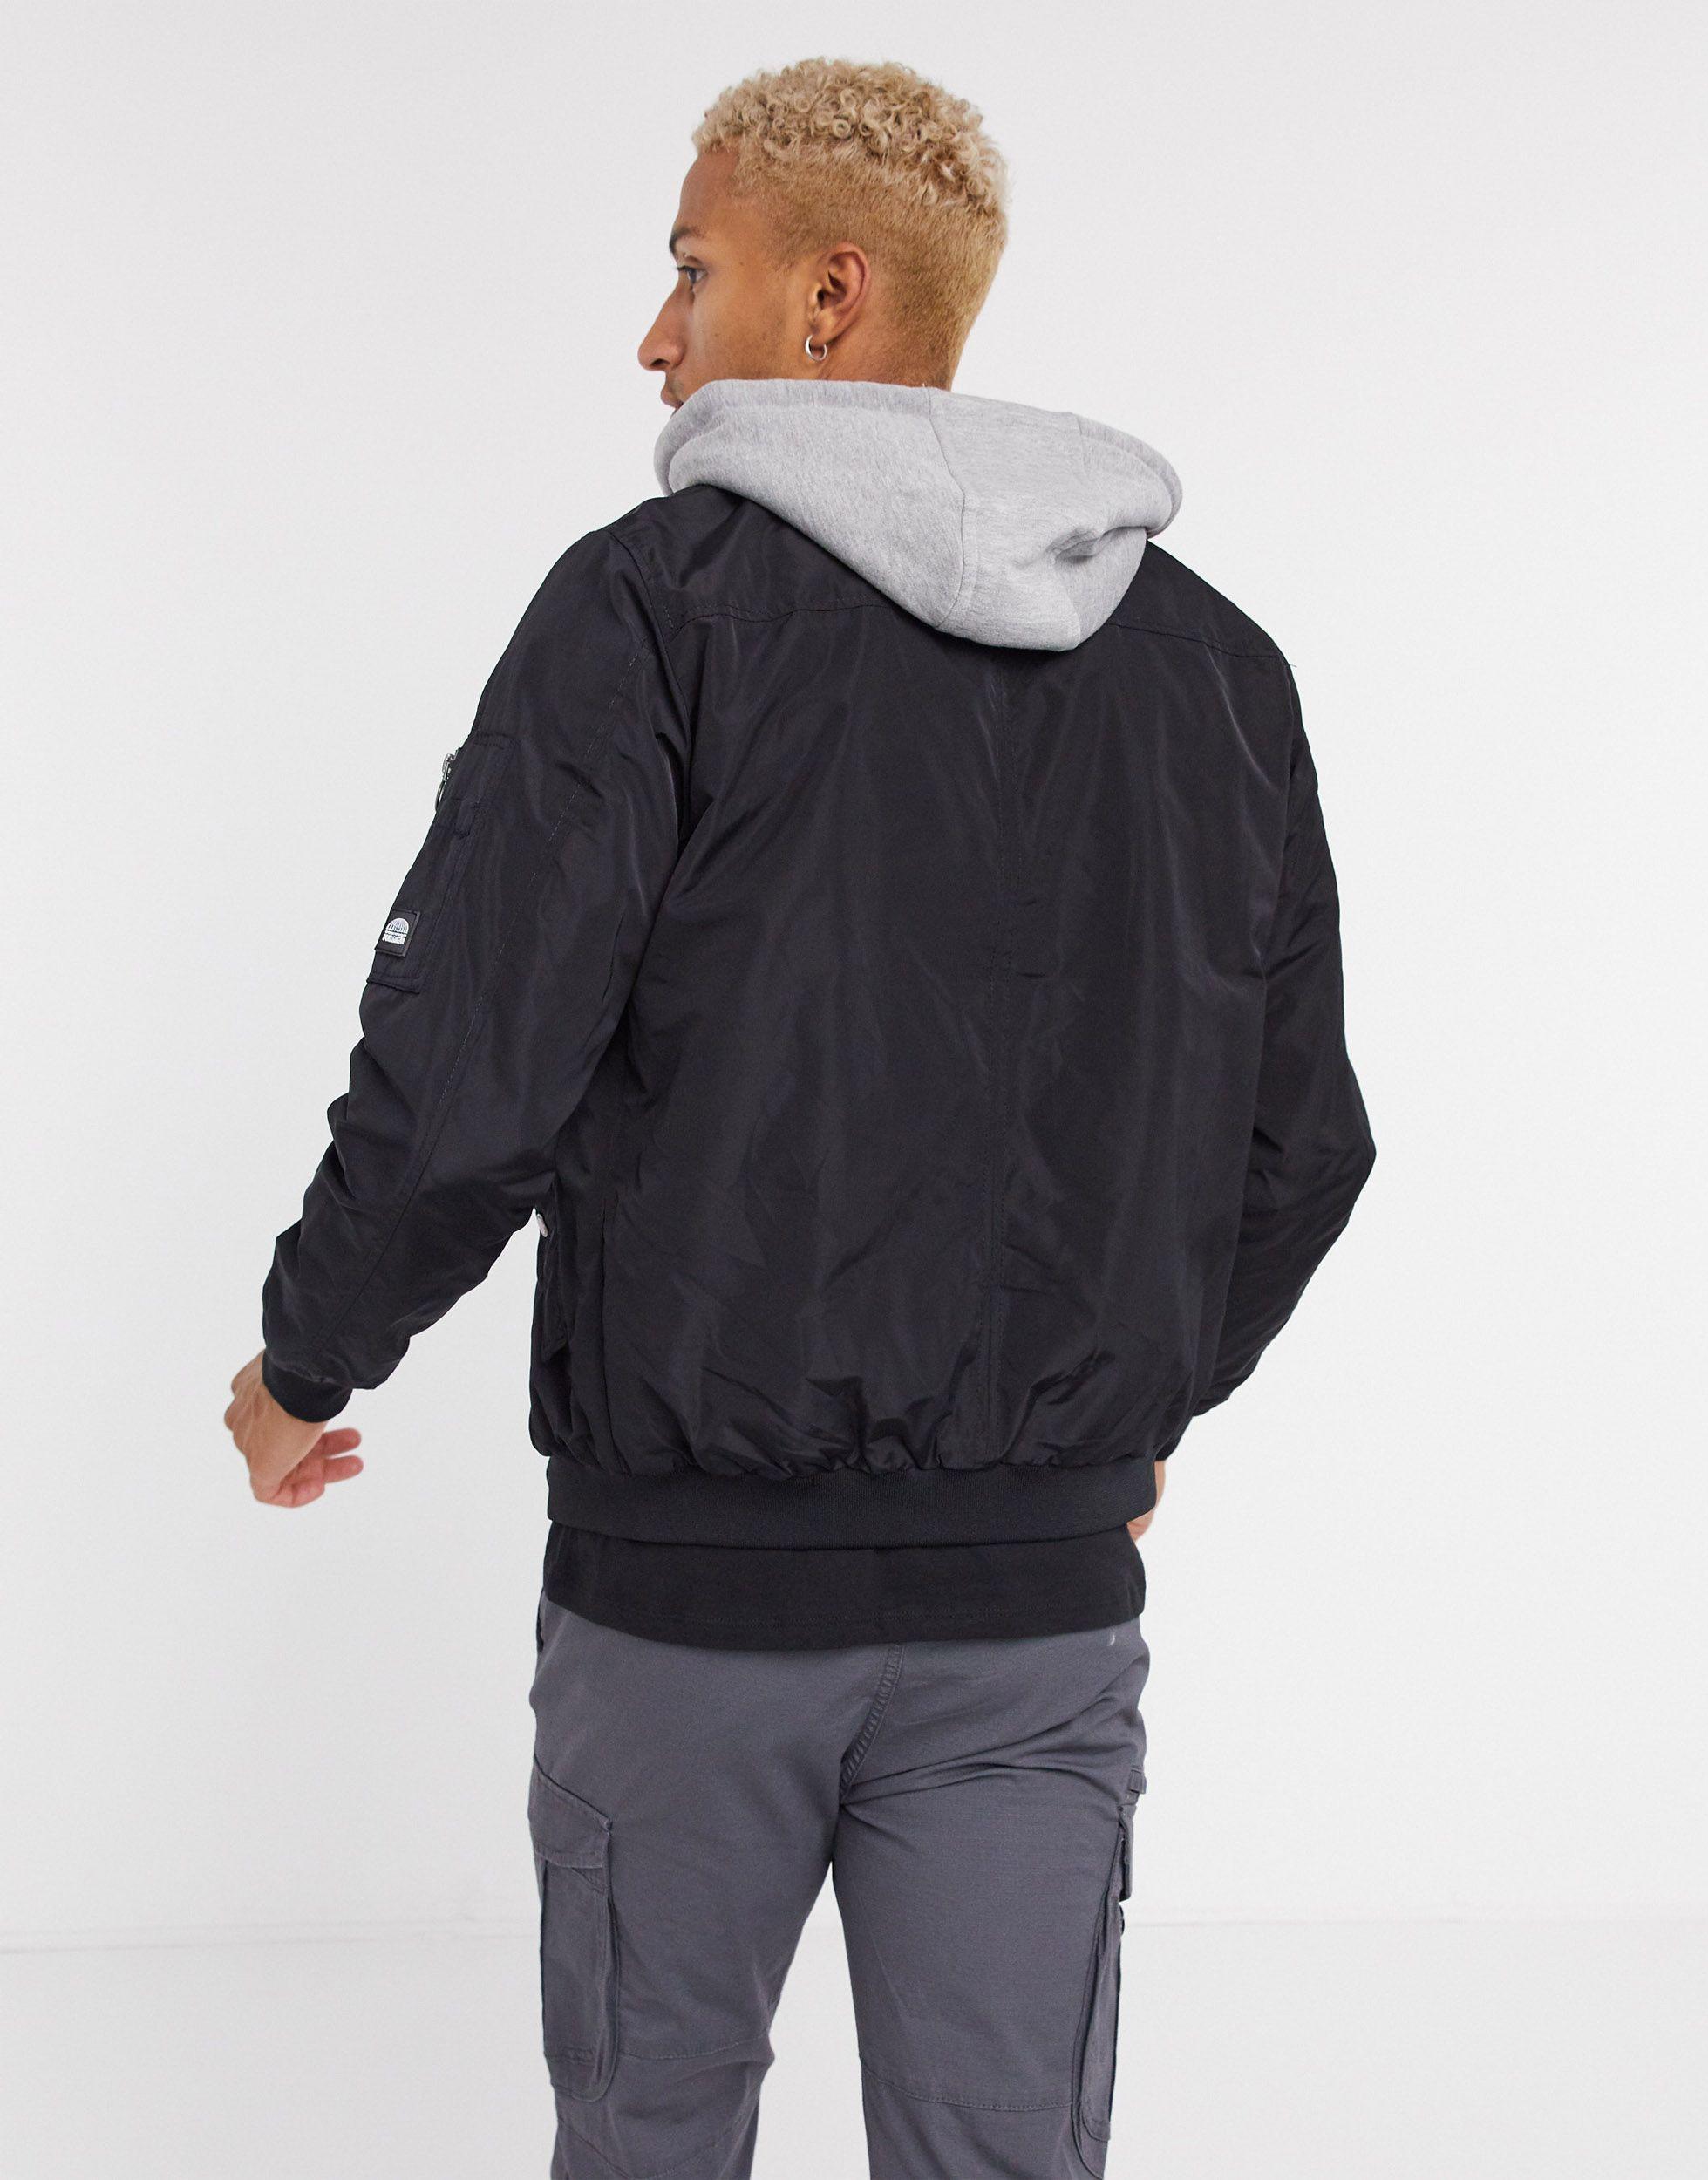 Pull&Bear Padded Bomber Jacket With Jersey Hood in Black for Men 